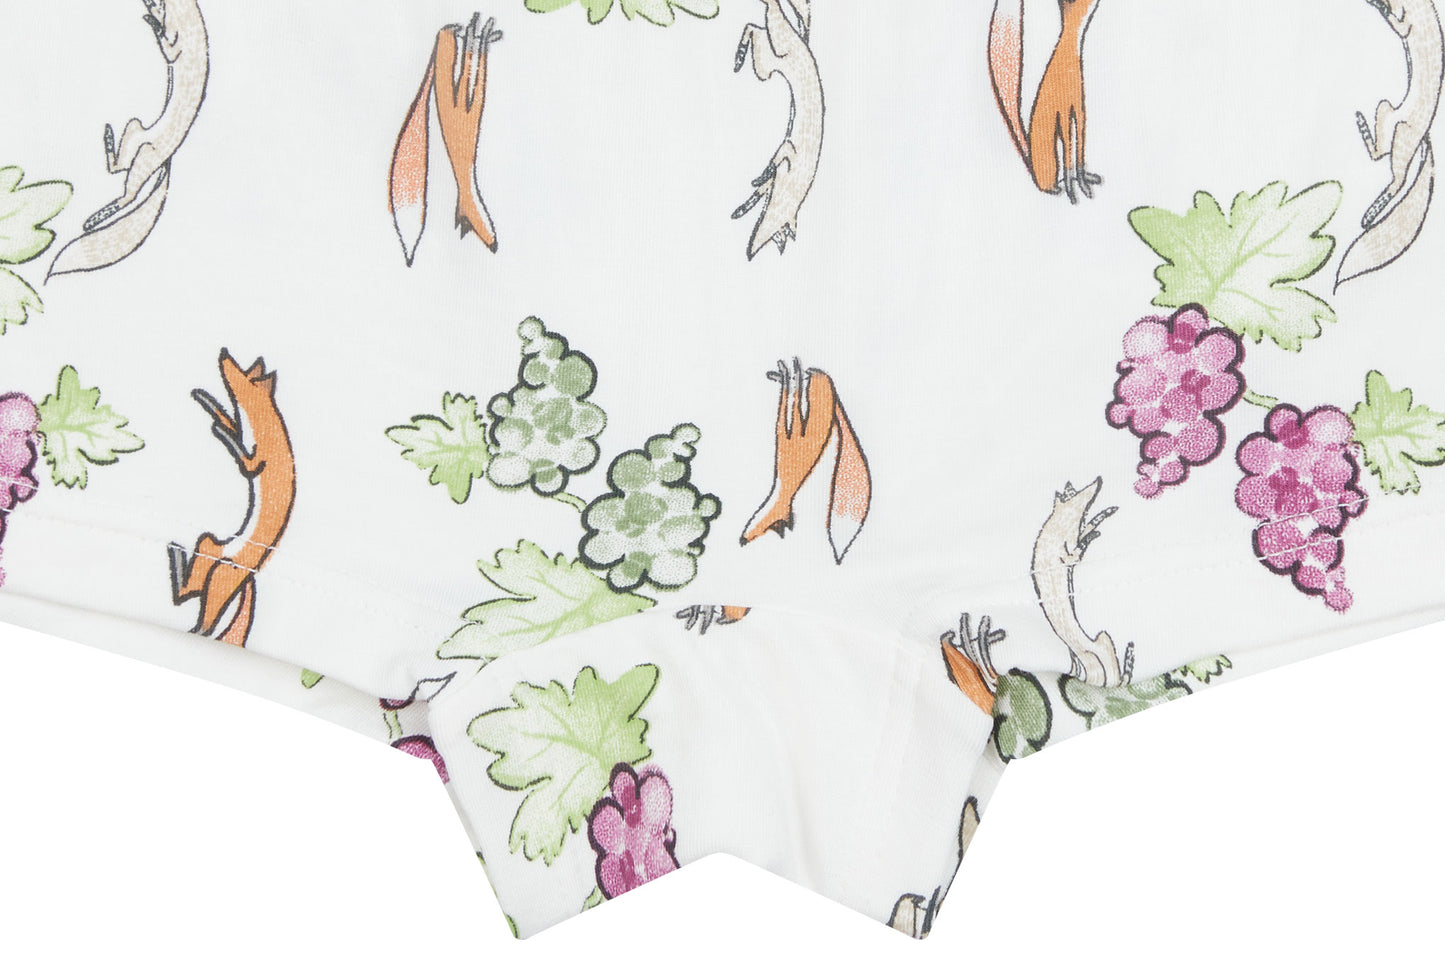 Girls Boy Short Underwear (Bamboo, 2 Pack) - The Mouse & The Fox